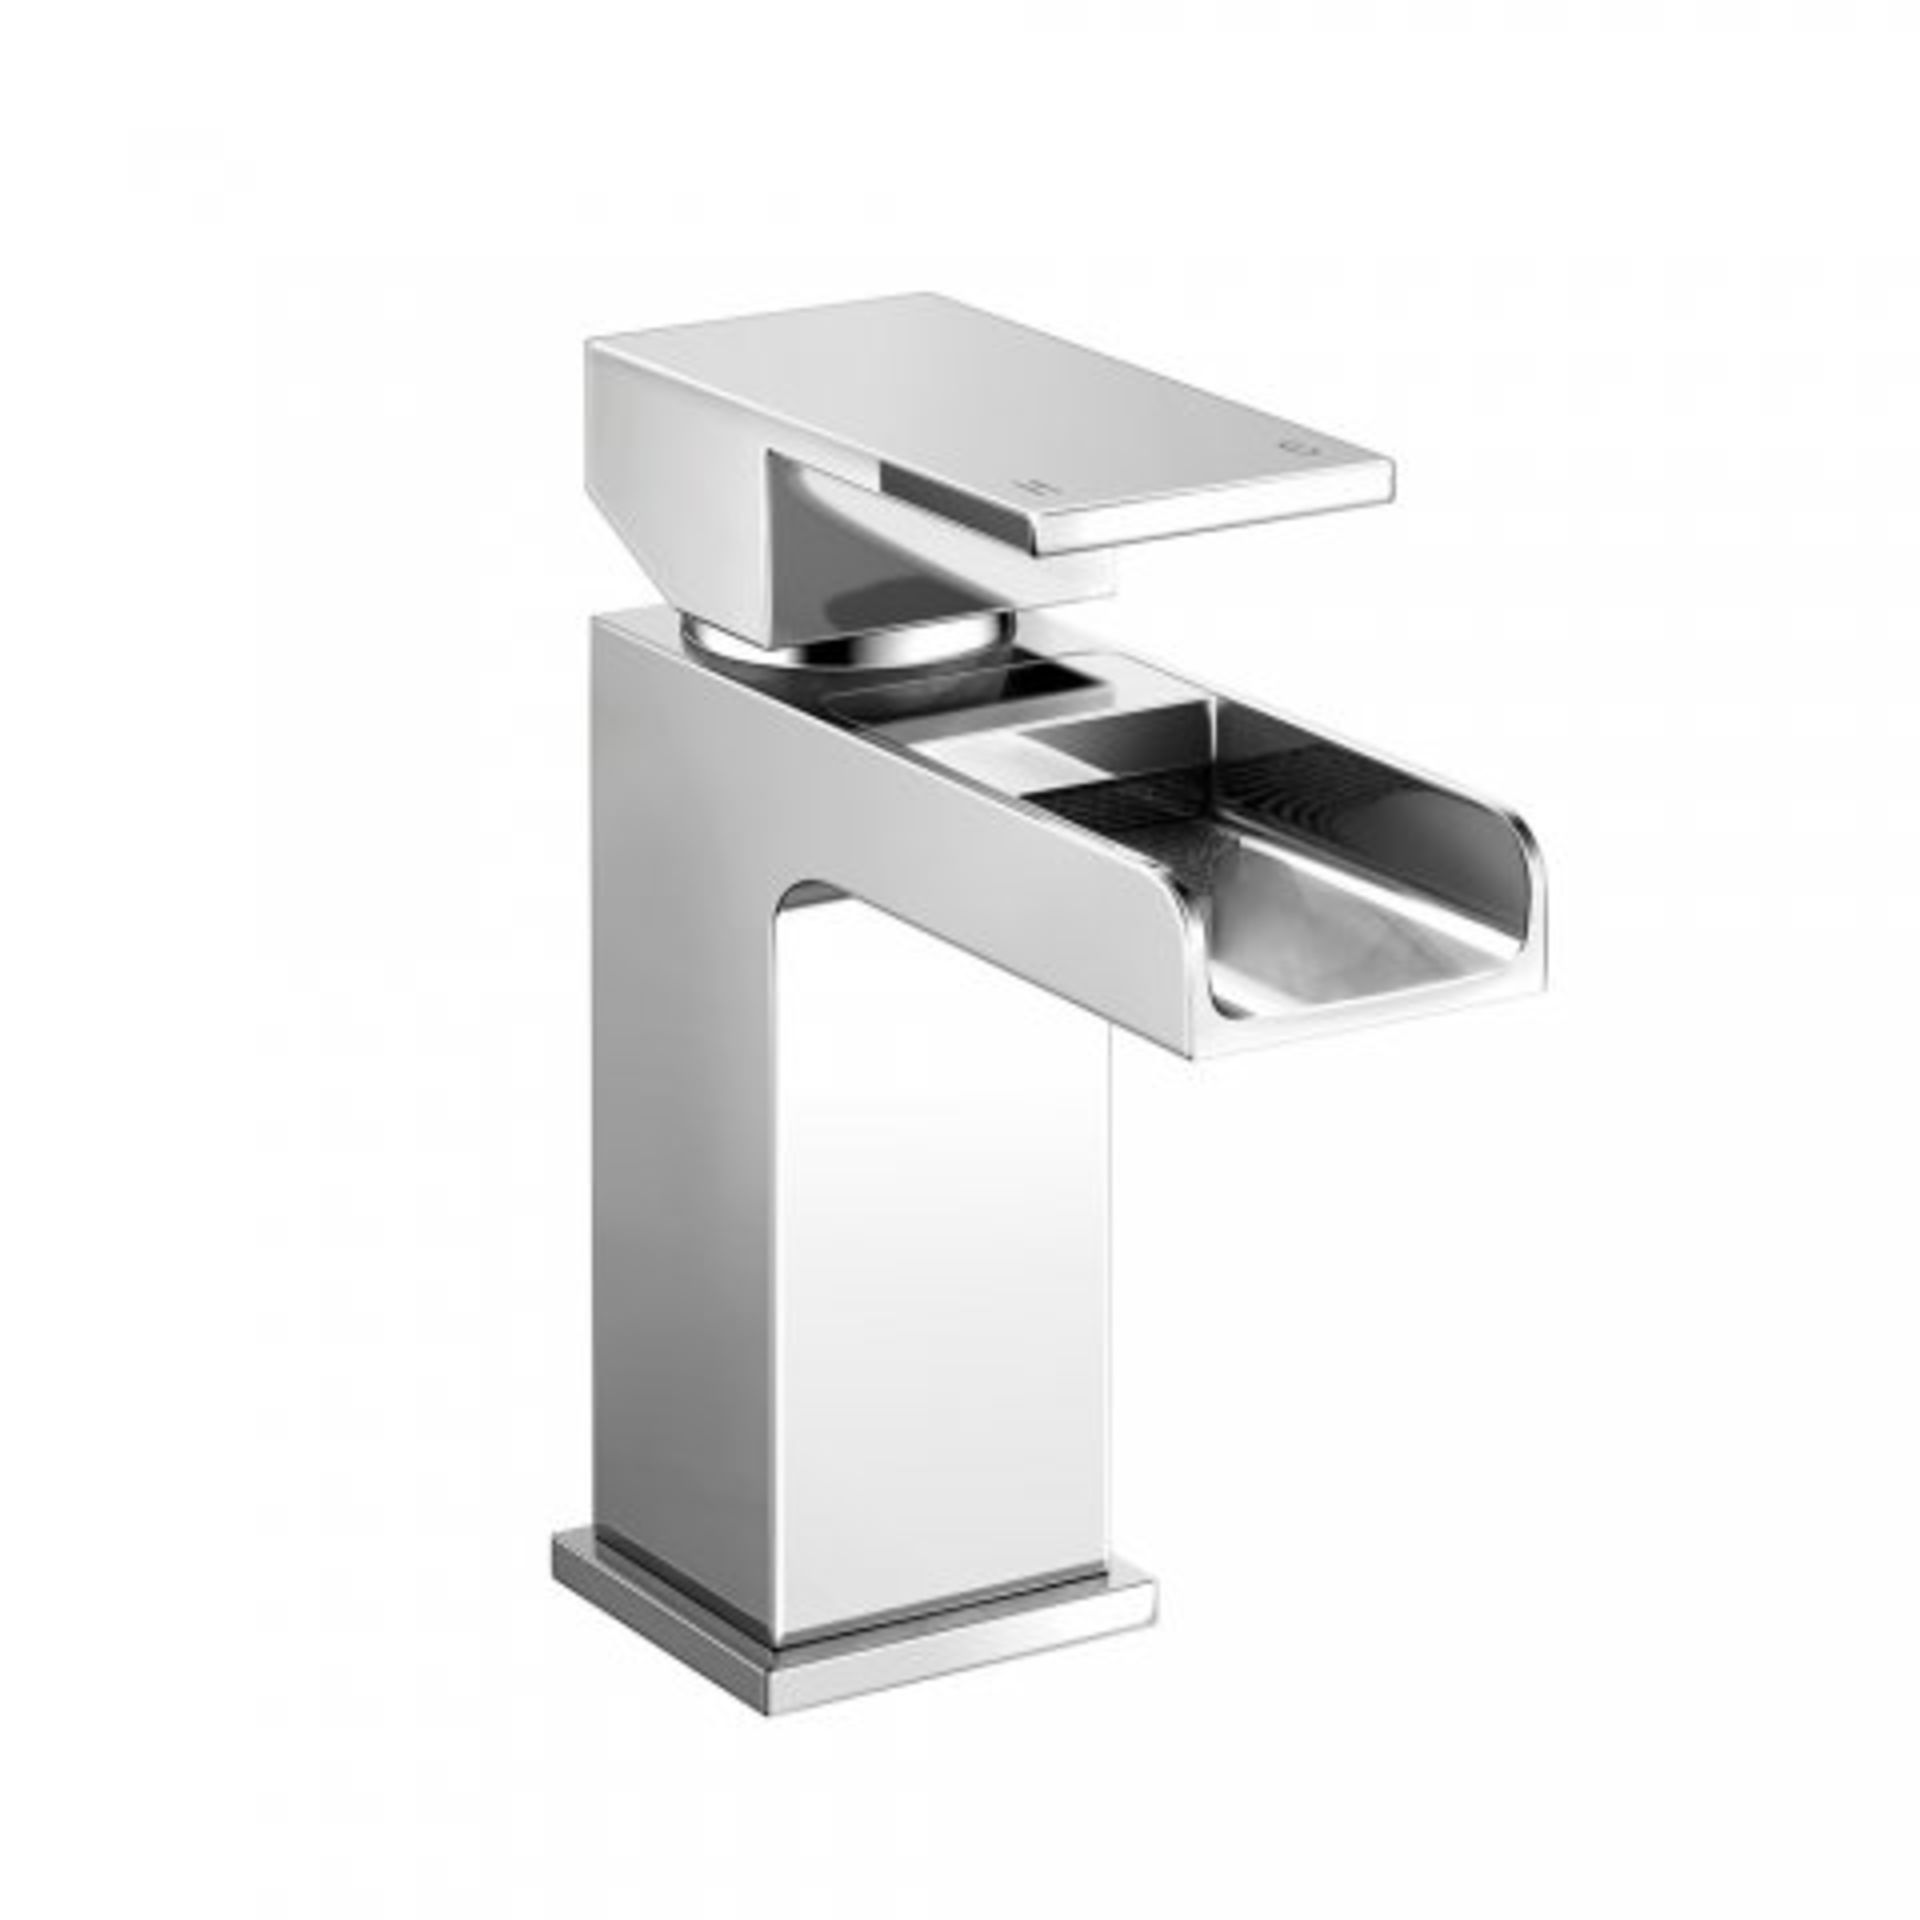 (H113) Niagra II Basin Mixer Tap Waterfall Feature Our range of waterfall taps add a contemporary - Image 2 of 3